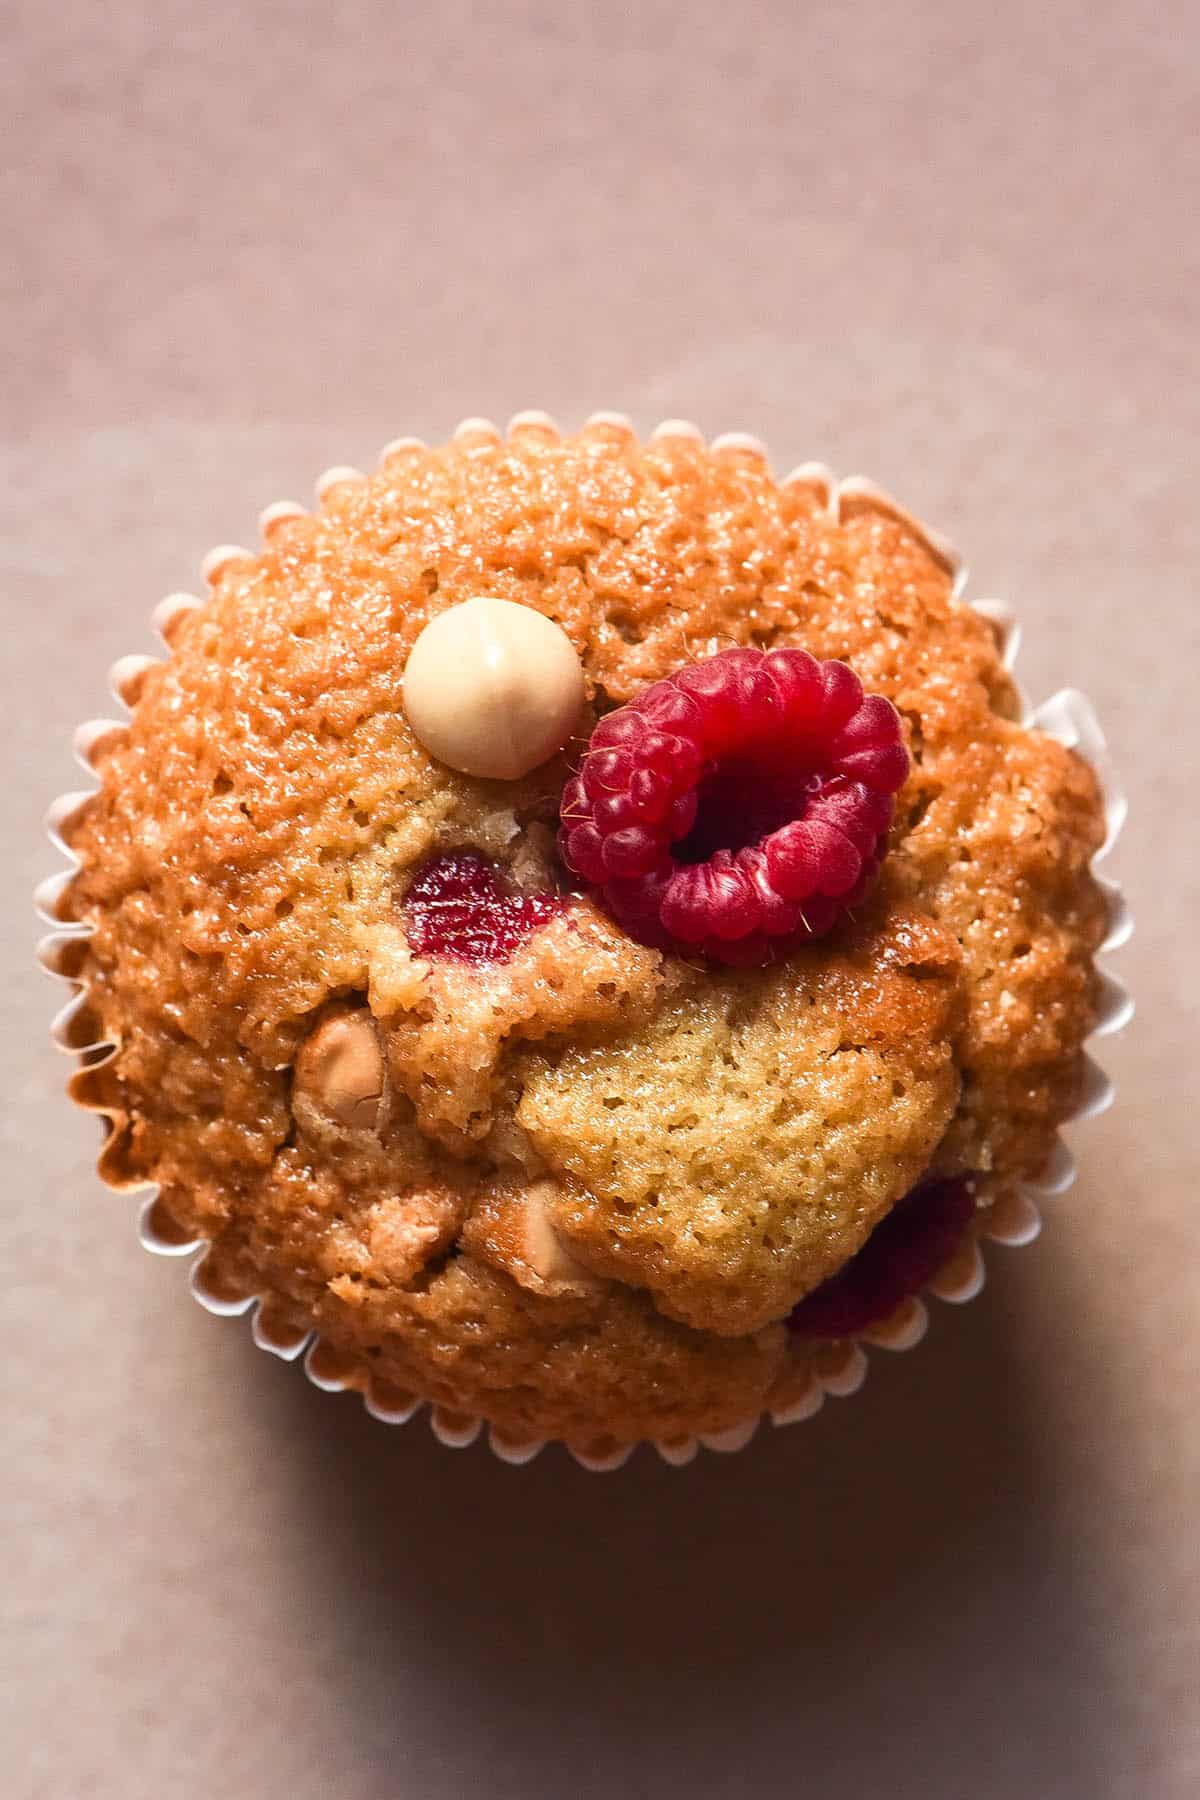 An aerial image of a gluten free chocolate chip muffin with raspberries. The muffin sits atop a pale pink ceramic plate